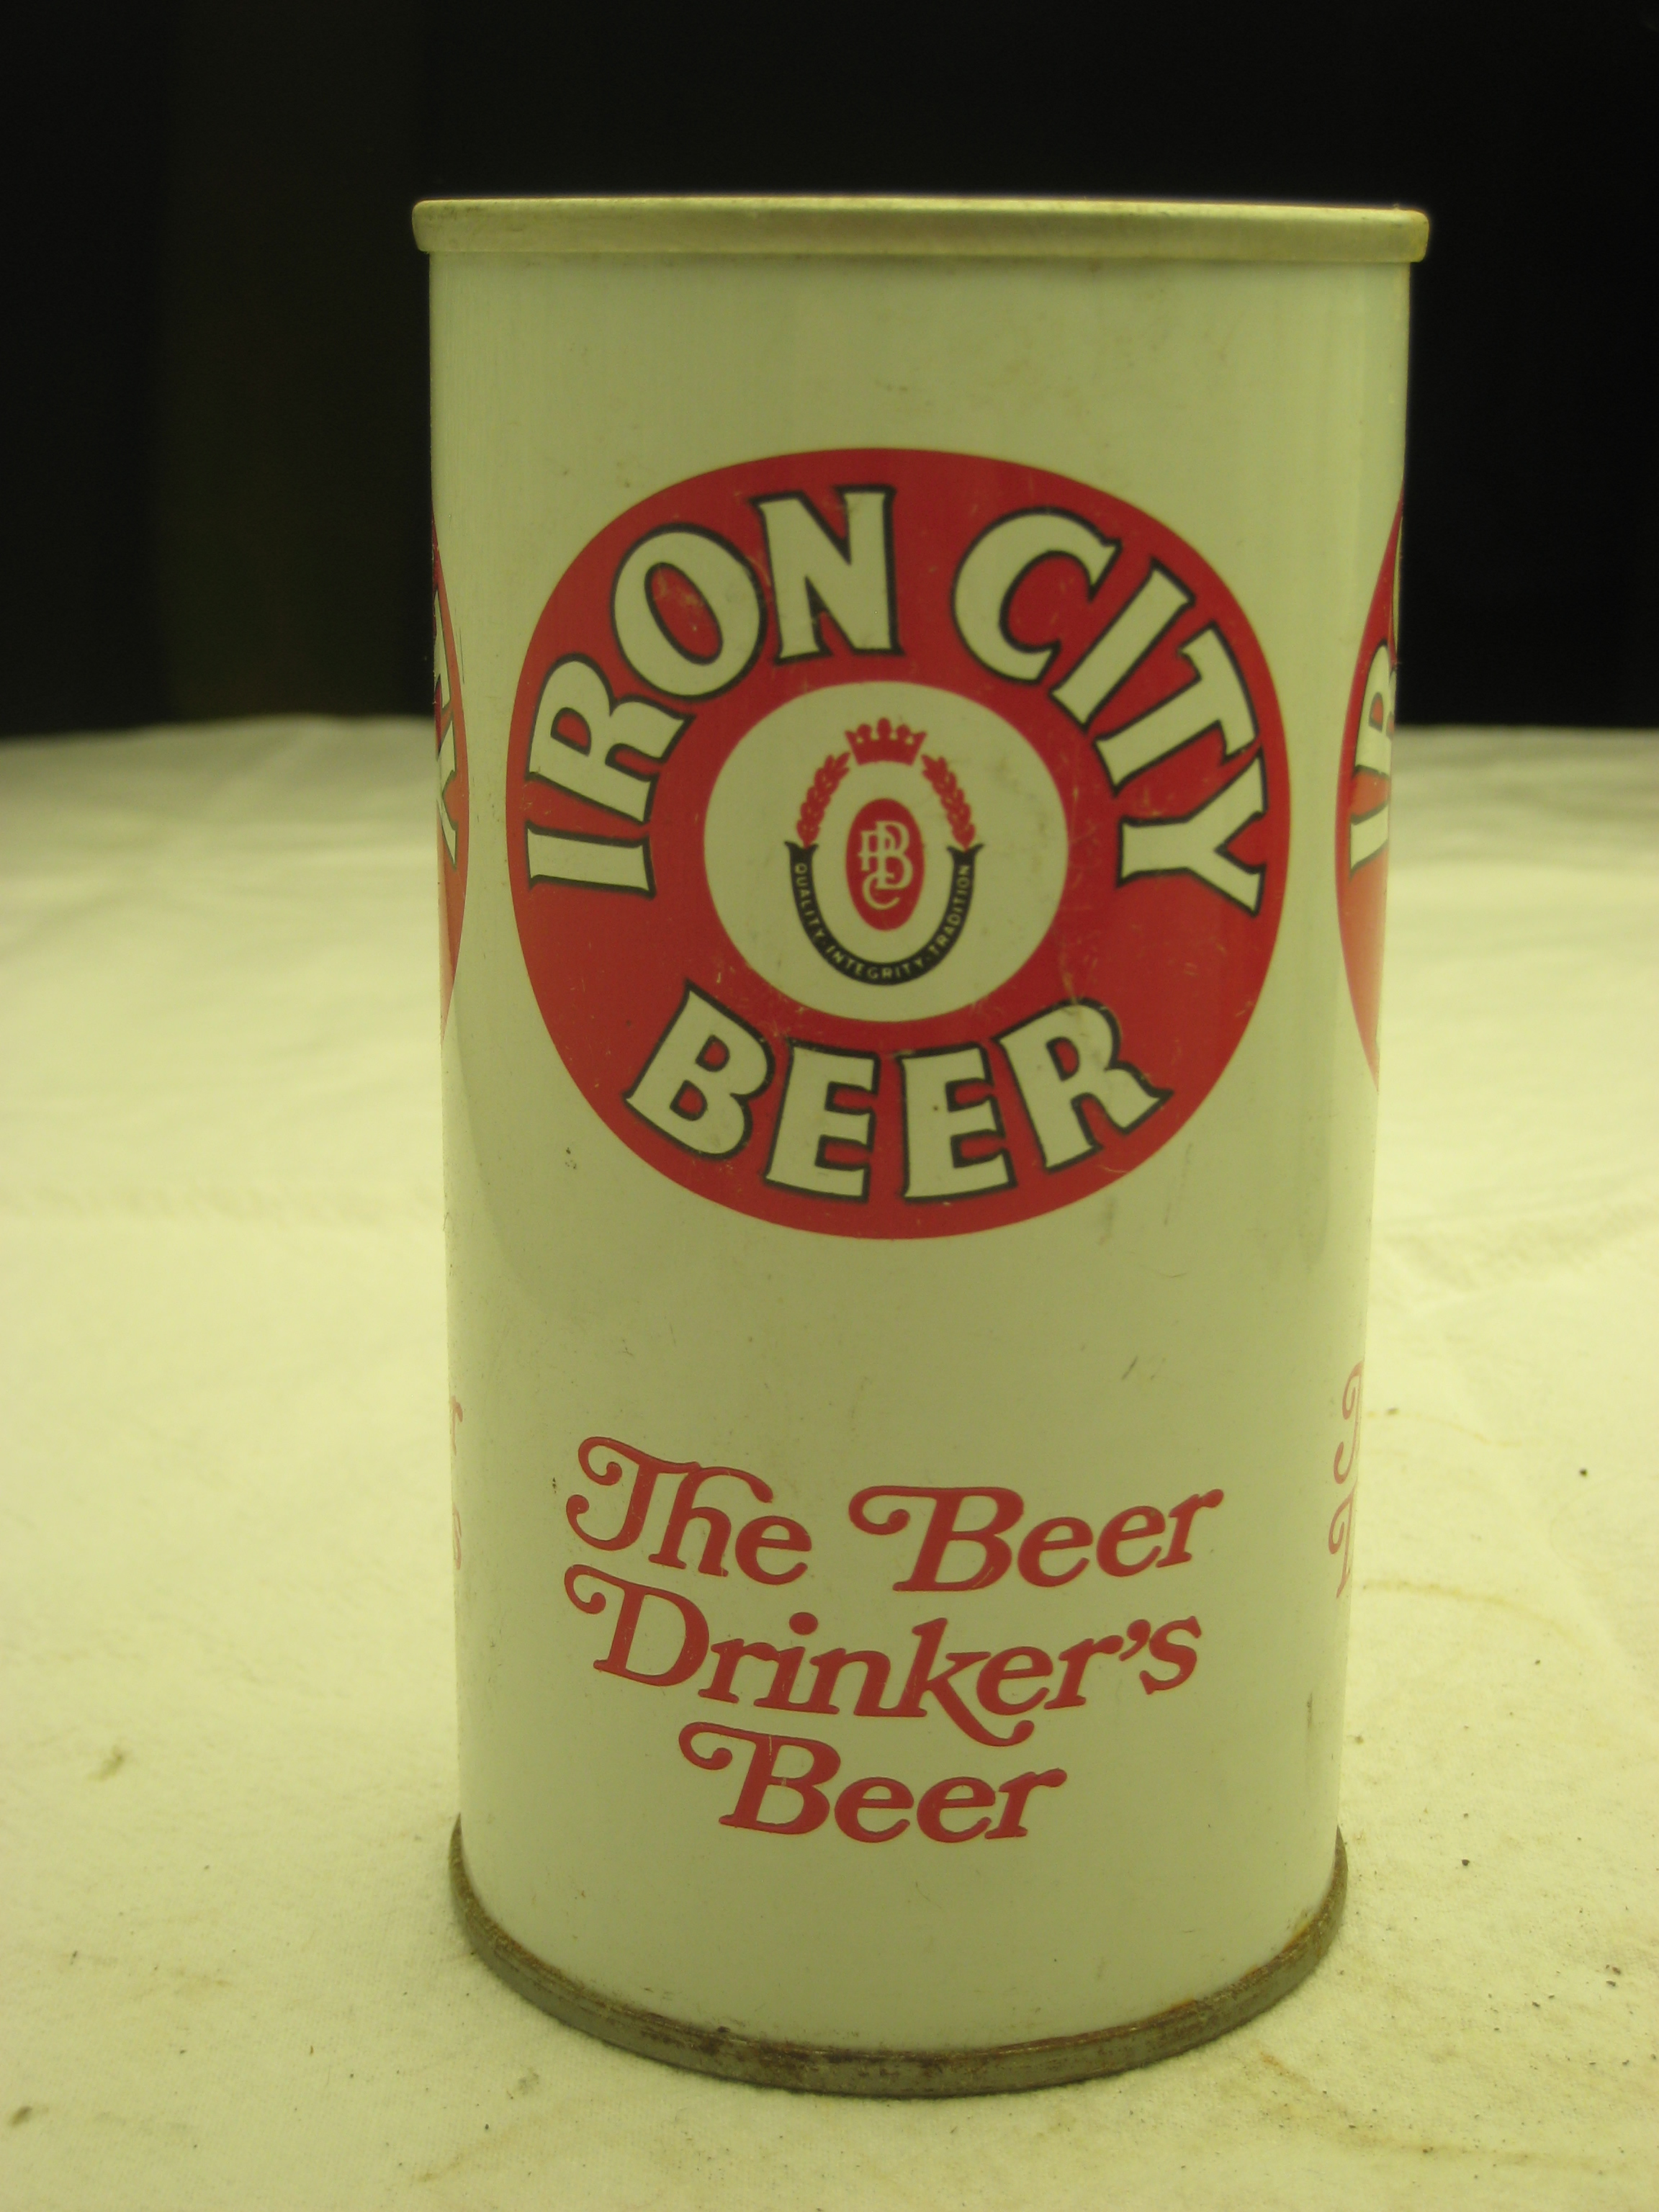 Vintage Iron City Beer can